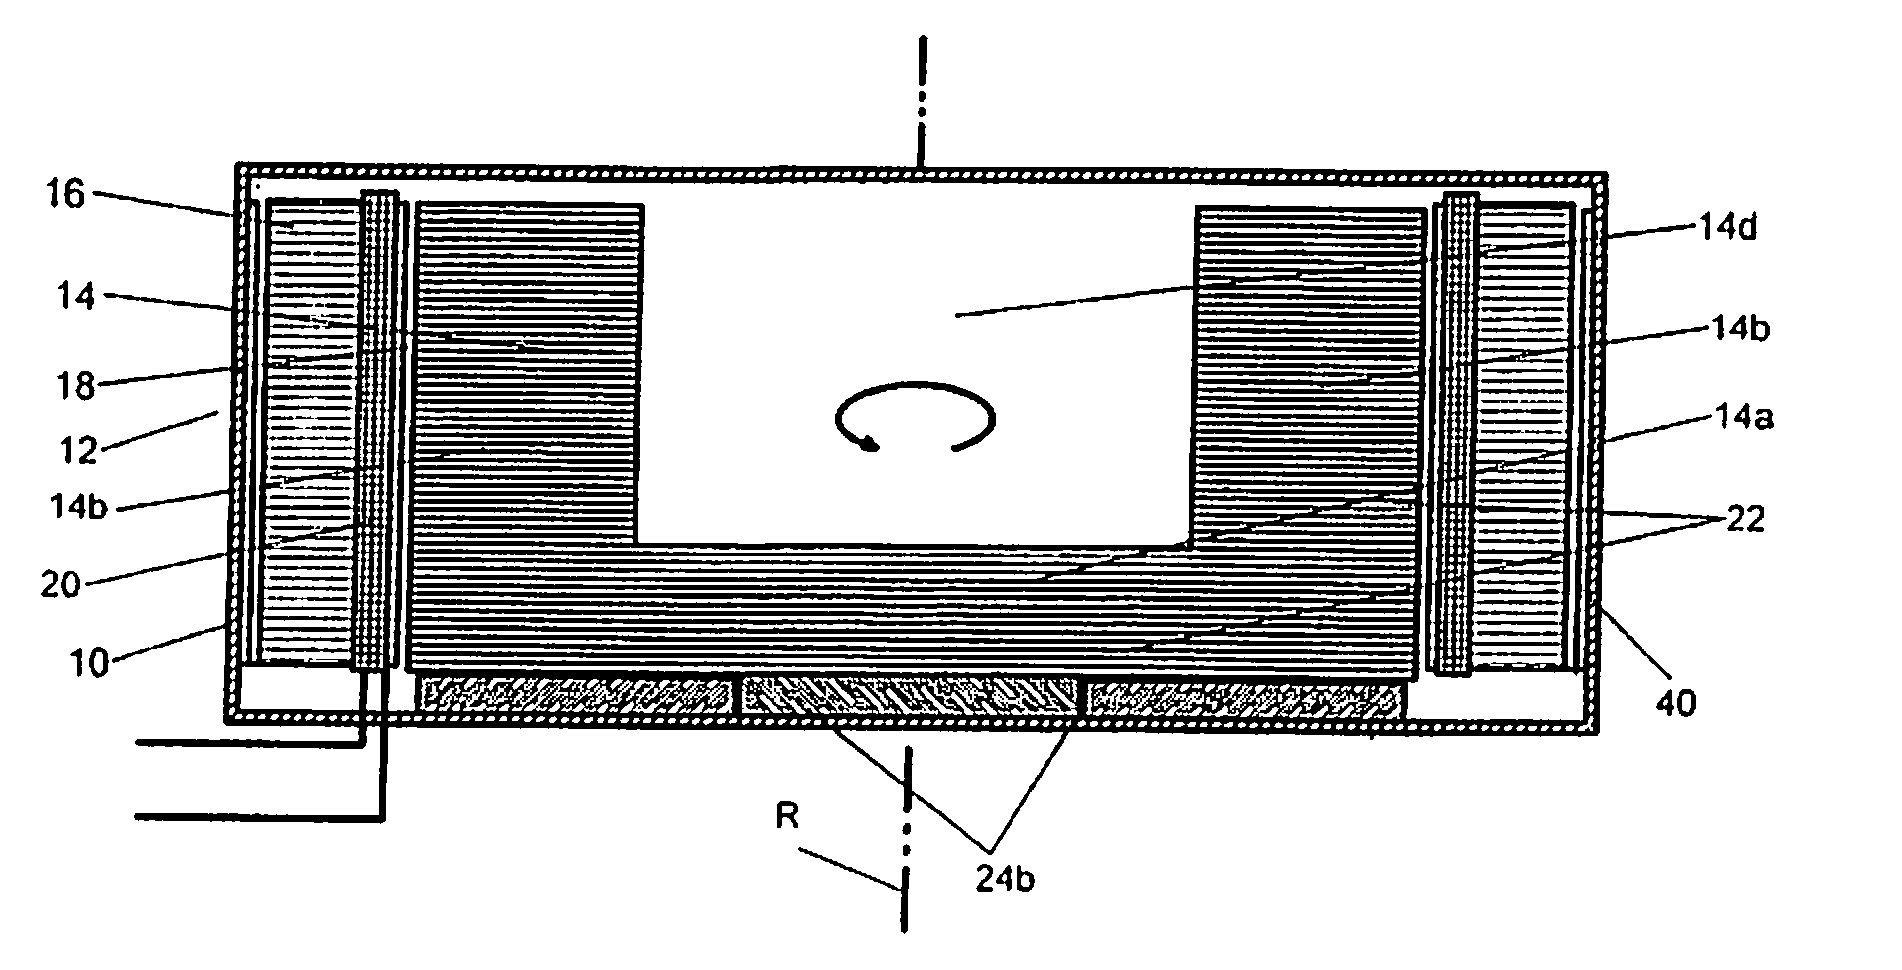 Energy accumulator comprising a switched reluctance machine